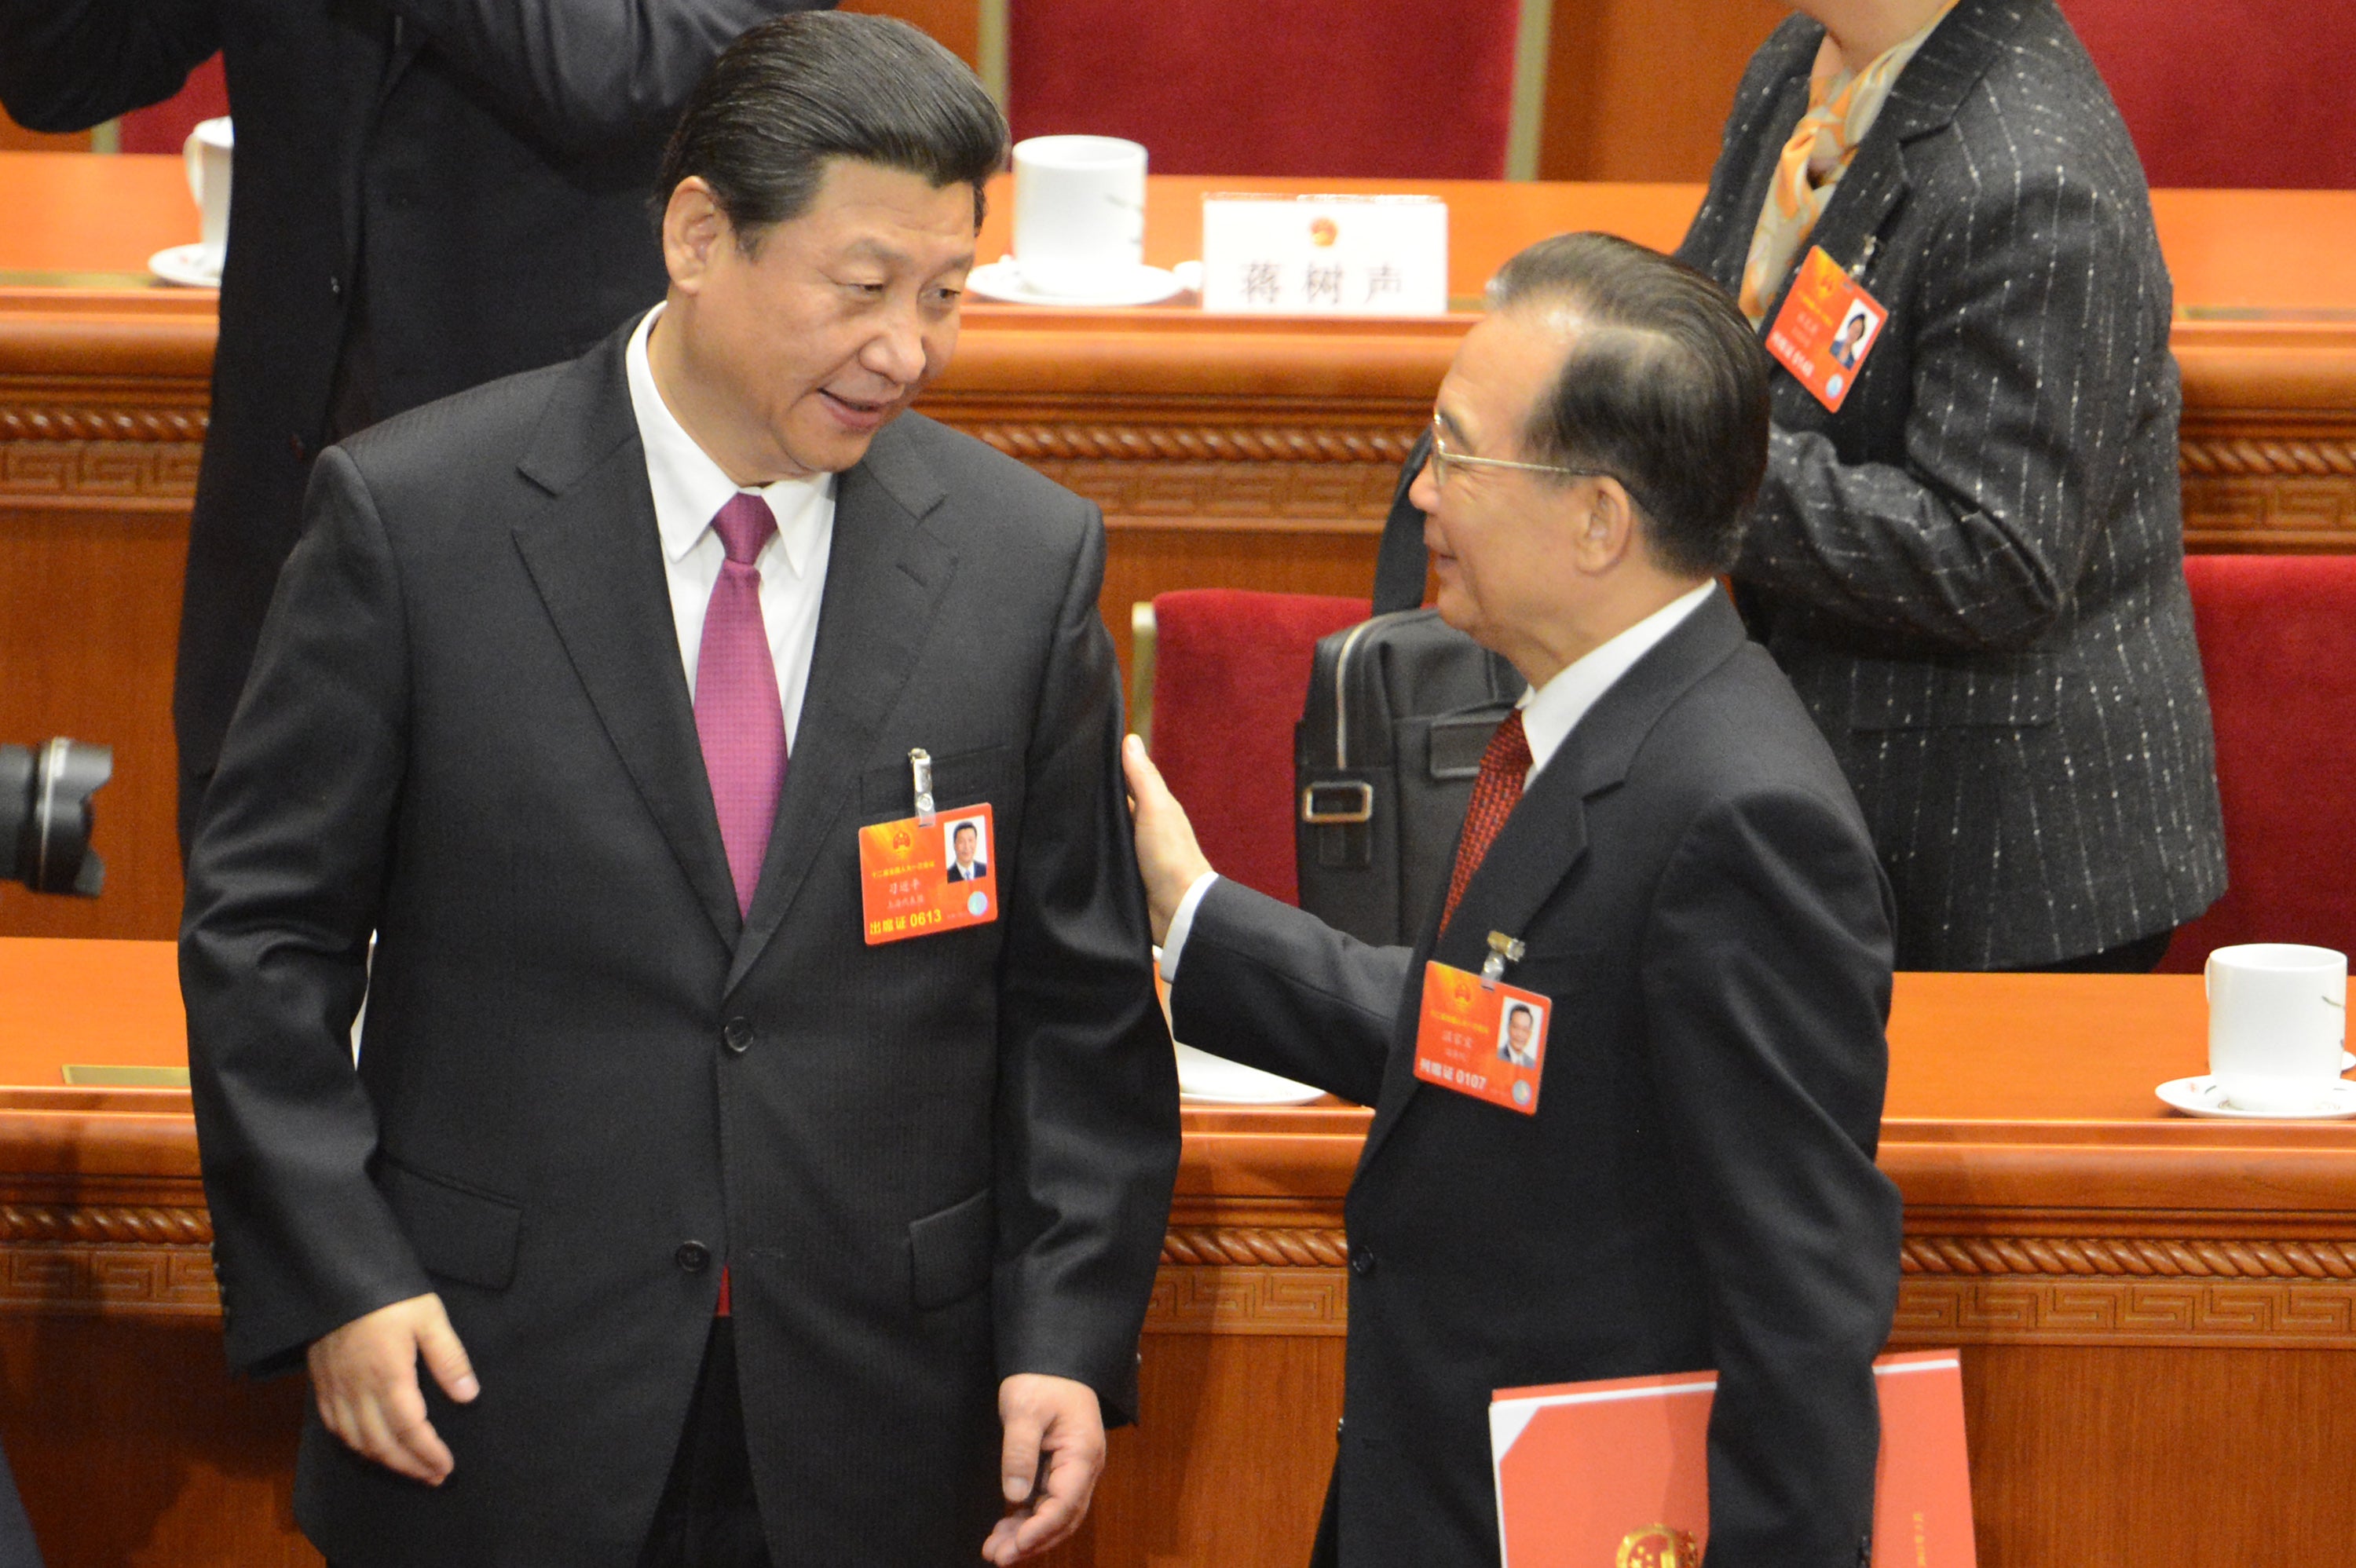 Xi Jinping talks to former Chinese premier Wen Jiabao after the closing session of the National People’s Congress in Beijing on 17 March 2013